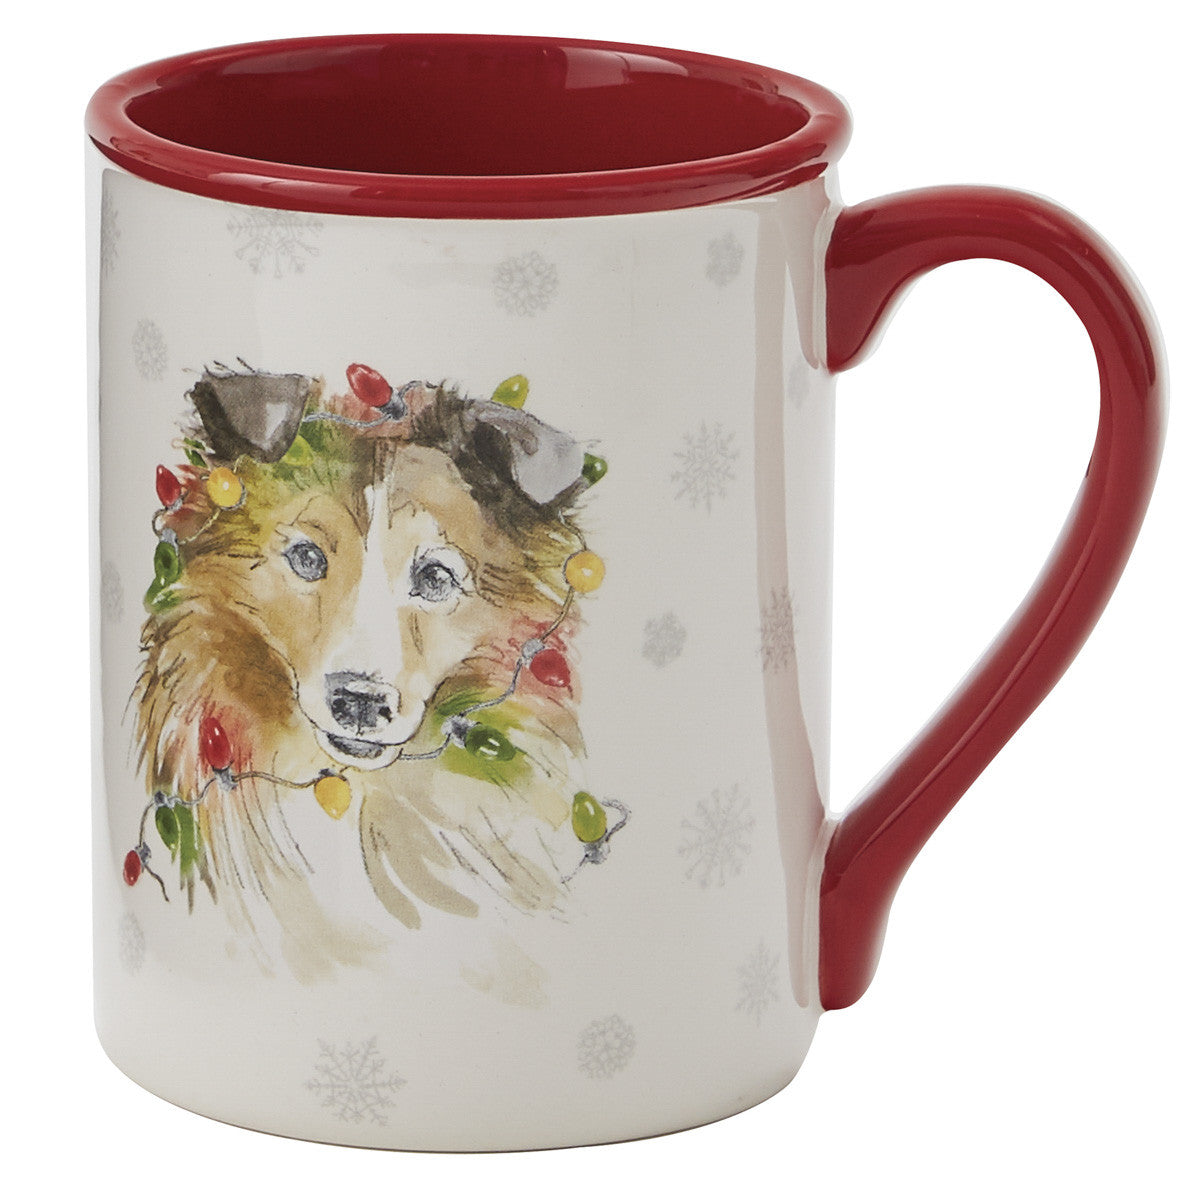 Holiday Paws Mugs - Set of 4 Assorted Park Designs